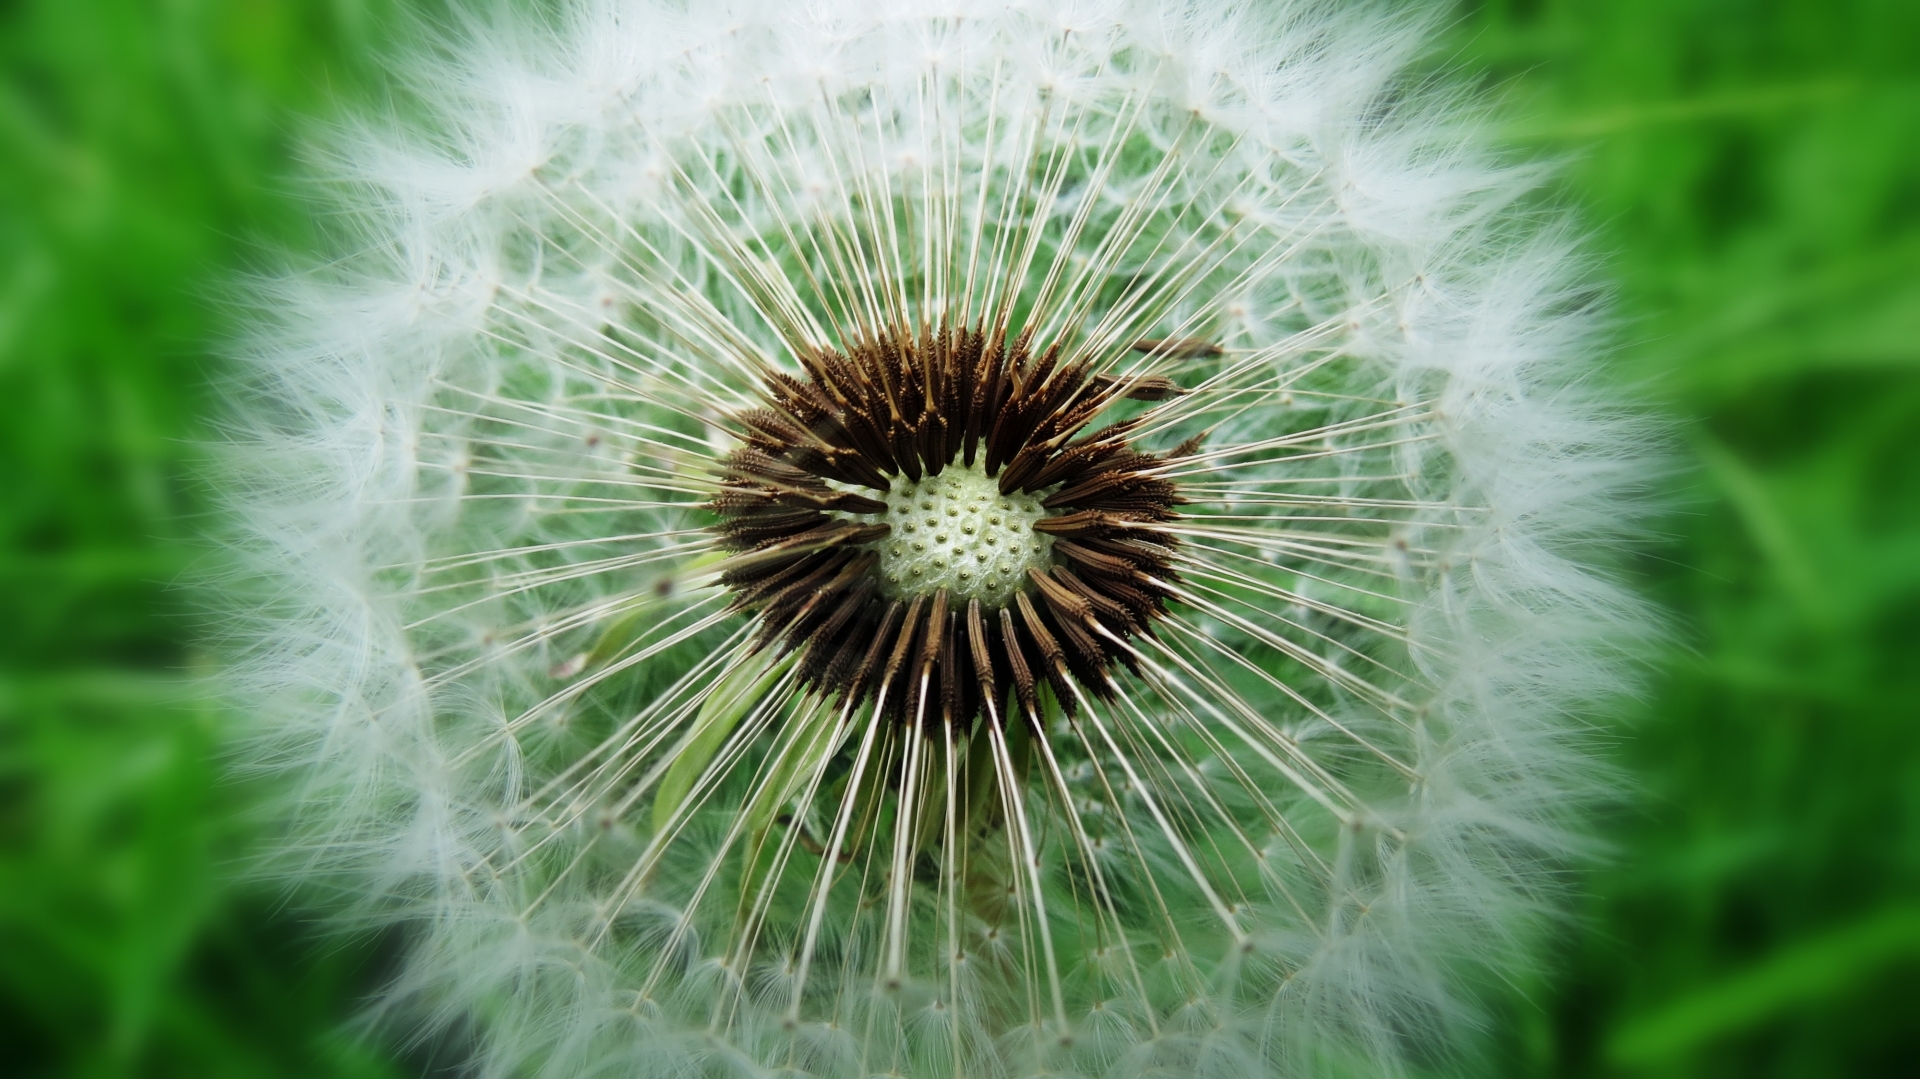 Sow thistle by TomKon